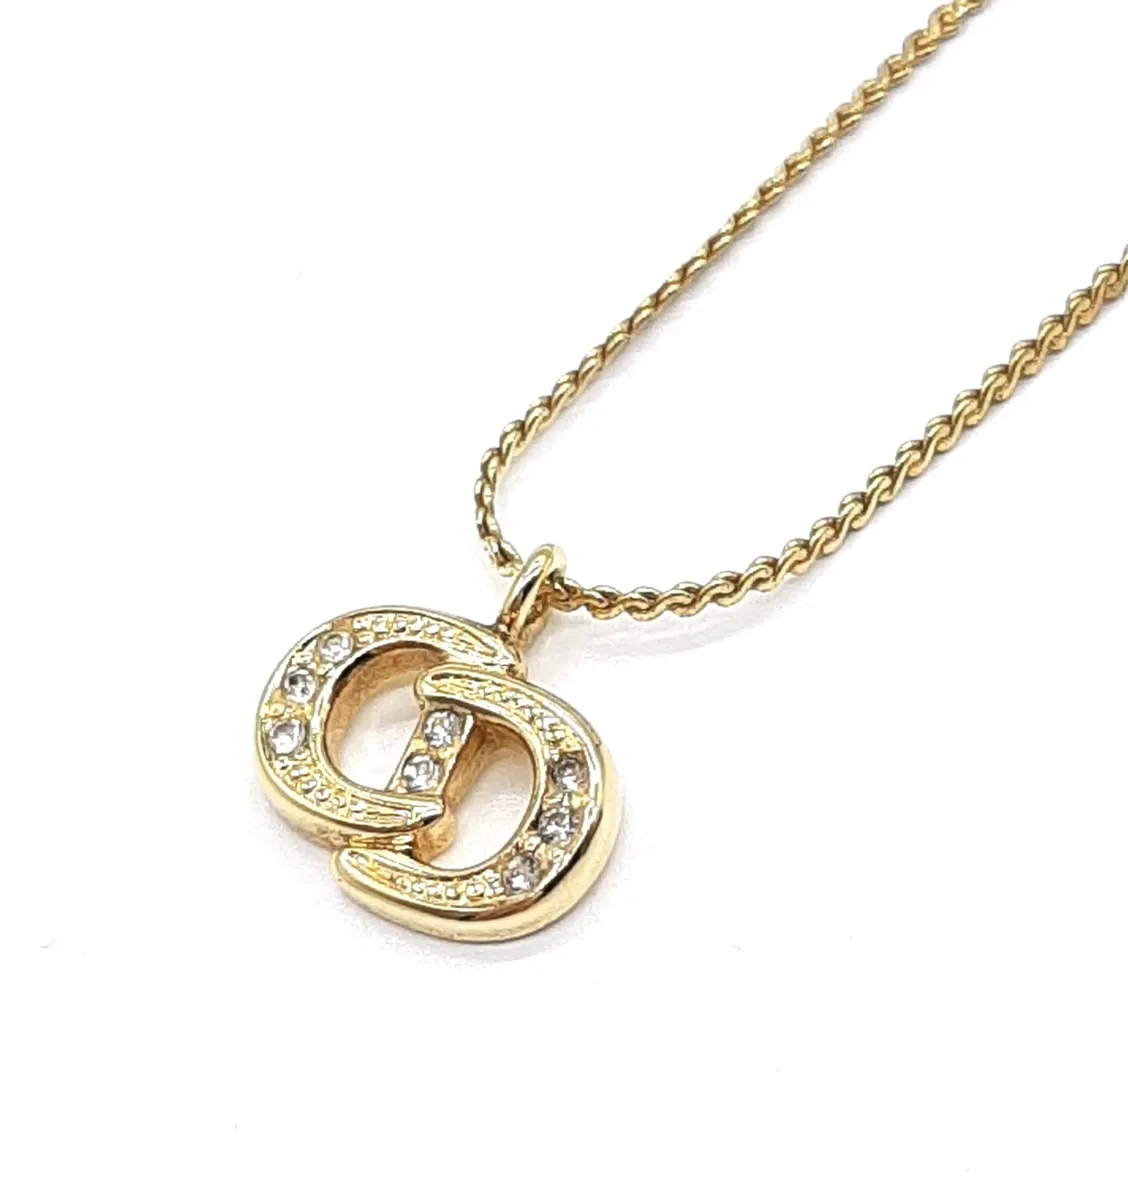 DIOR Petit CD Necklace Gold-Finish Metal - Fashion Jewelry - Woman | DIOR |  ShopLook